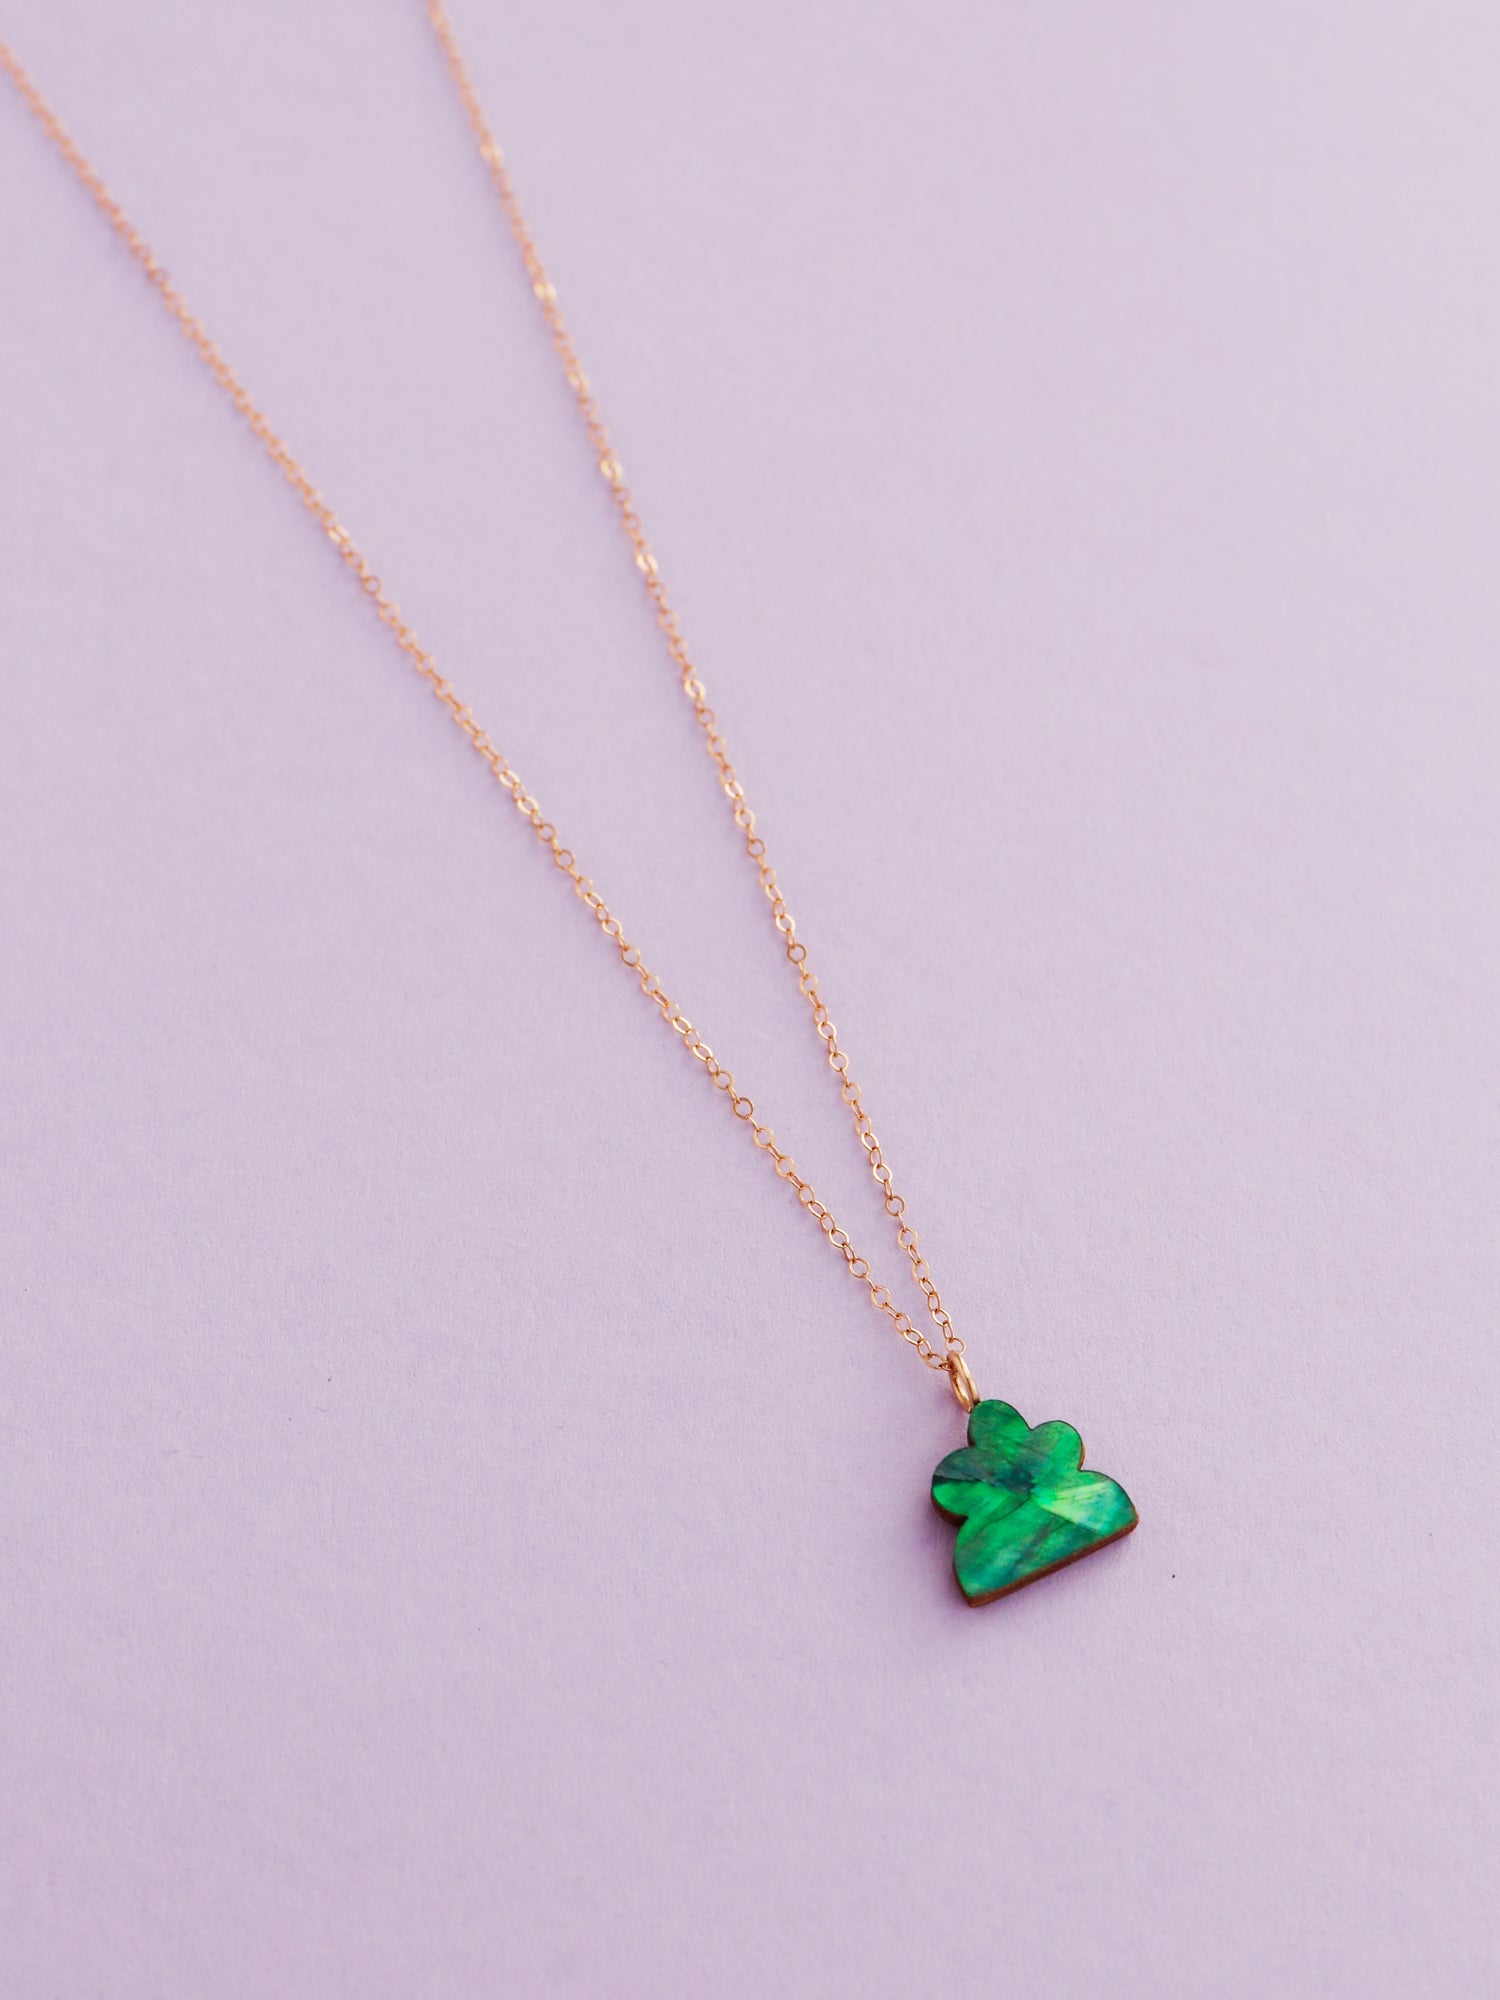 Lena Necklace in Emerald. A confetti-inspired abstract pendant on a 45cm 14k gold-filled chain. Made with a lovely iridescent shell veneer which catches the light beautifully. Made in the UK by Wolf & Moon.